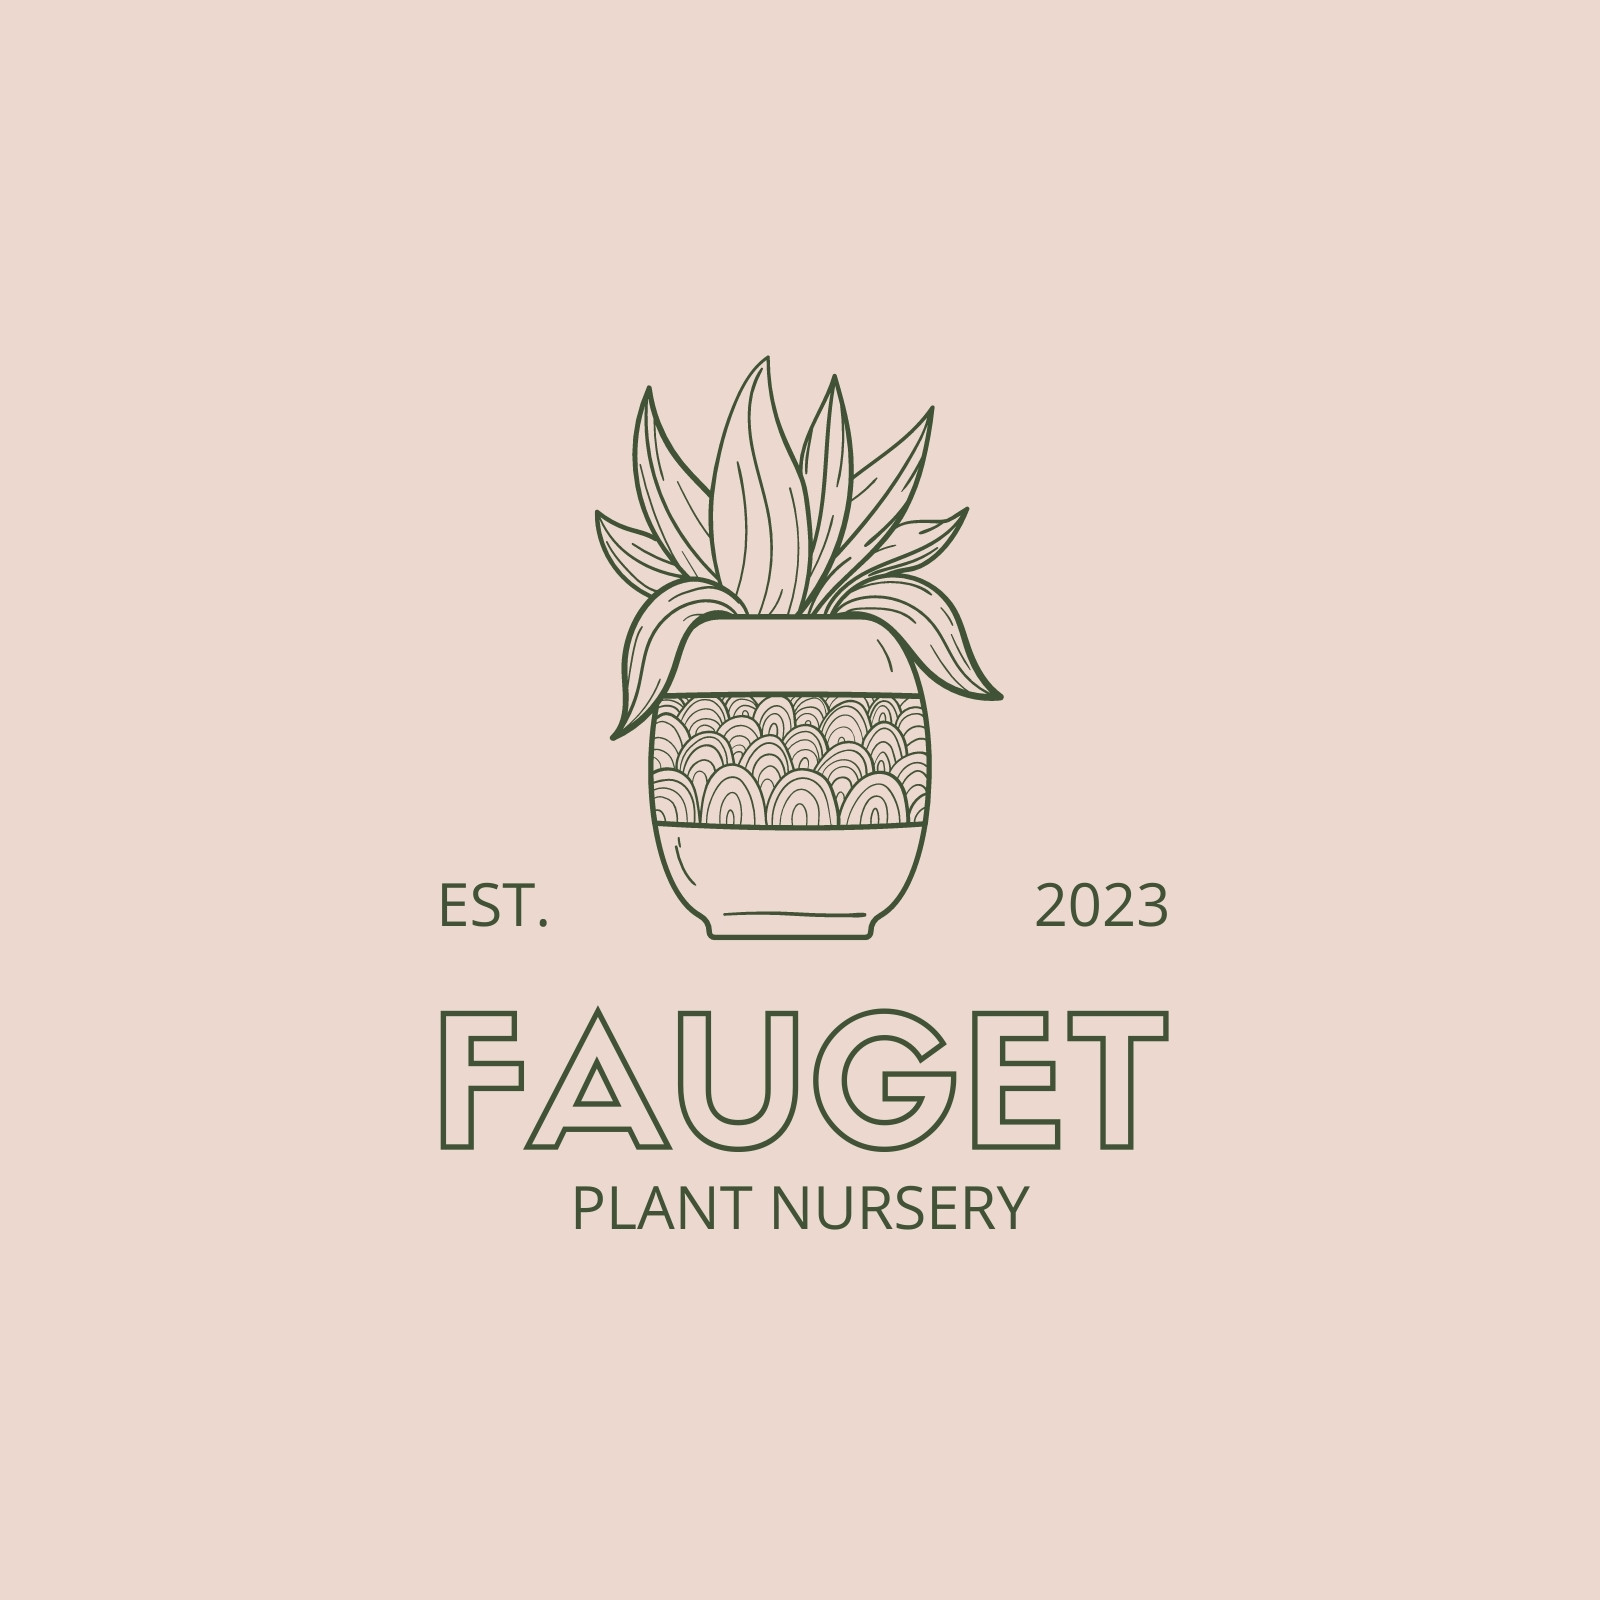 Brown plant nursery logo template image_picture free download  450039000_lovepik.com